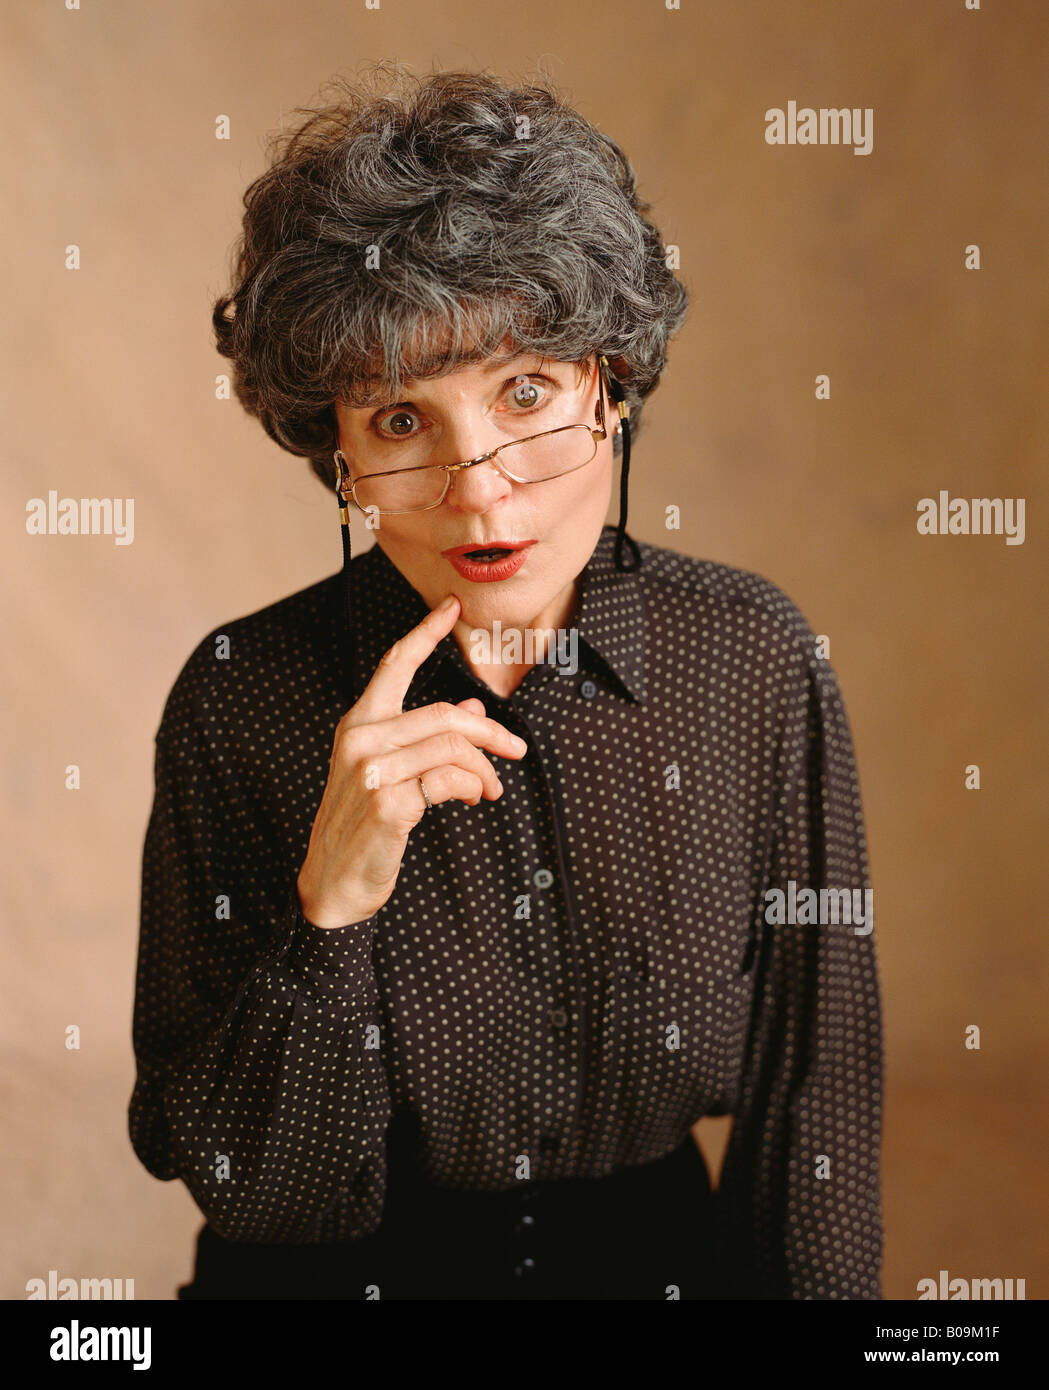 An expression of humor from an older woman with gray hair and reading glasses in a studio portrait. Stock Photo